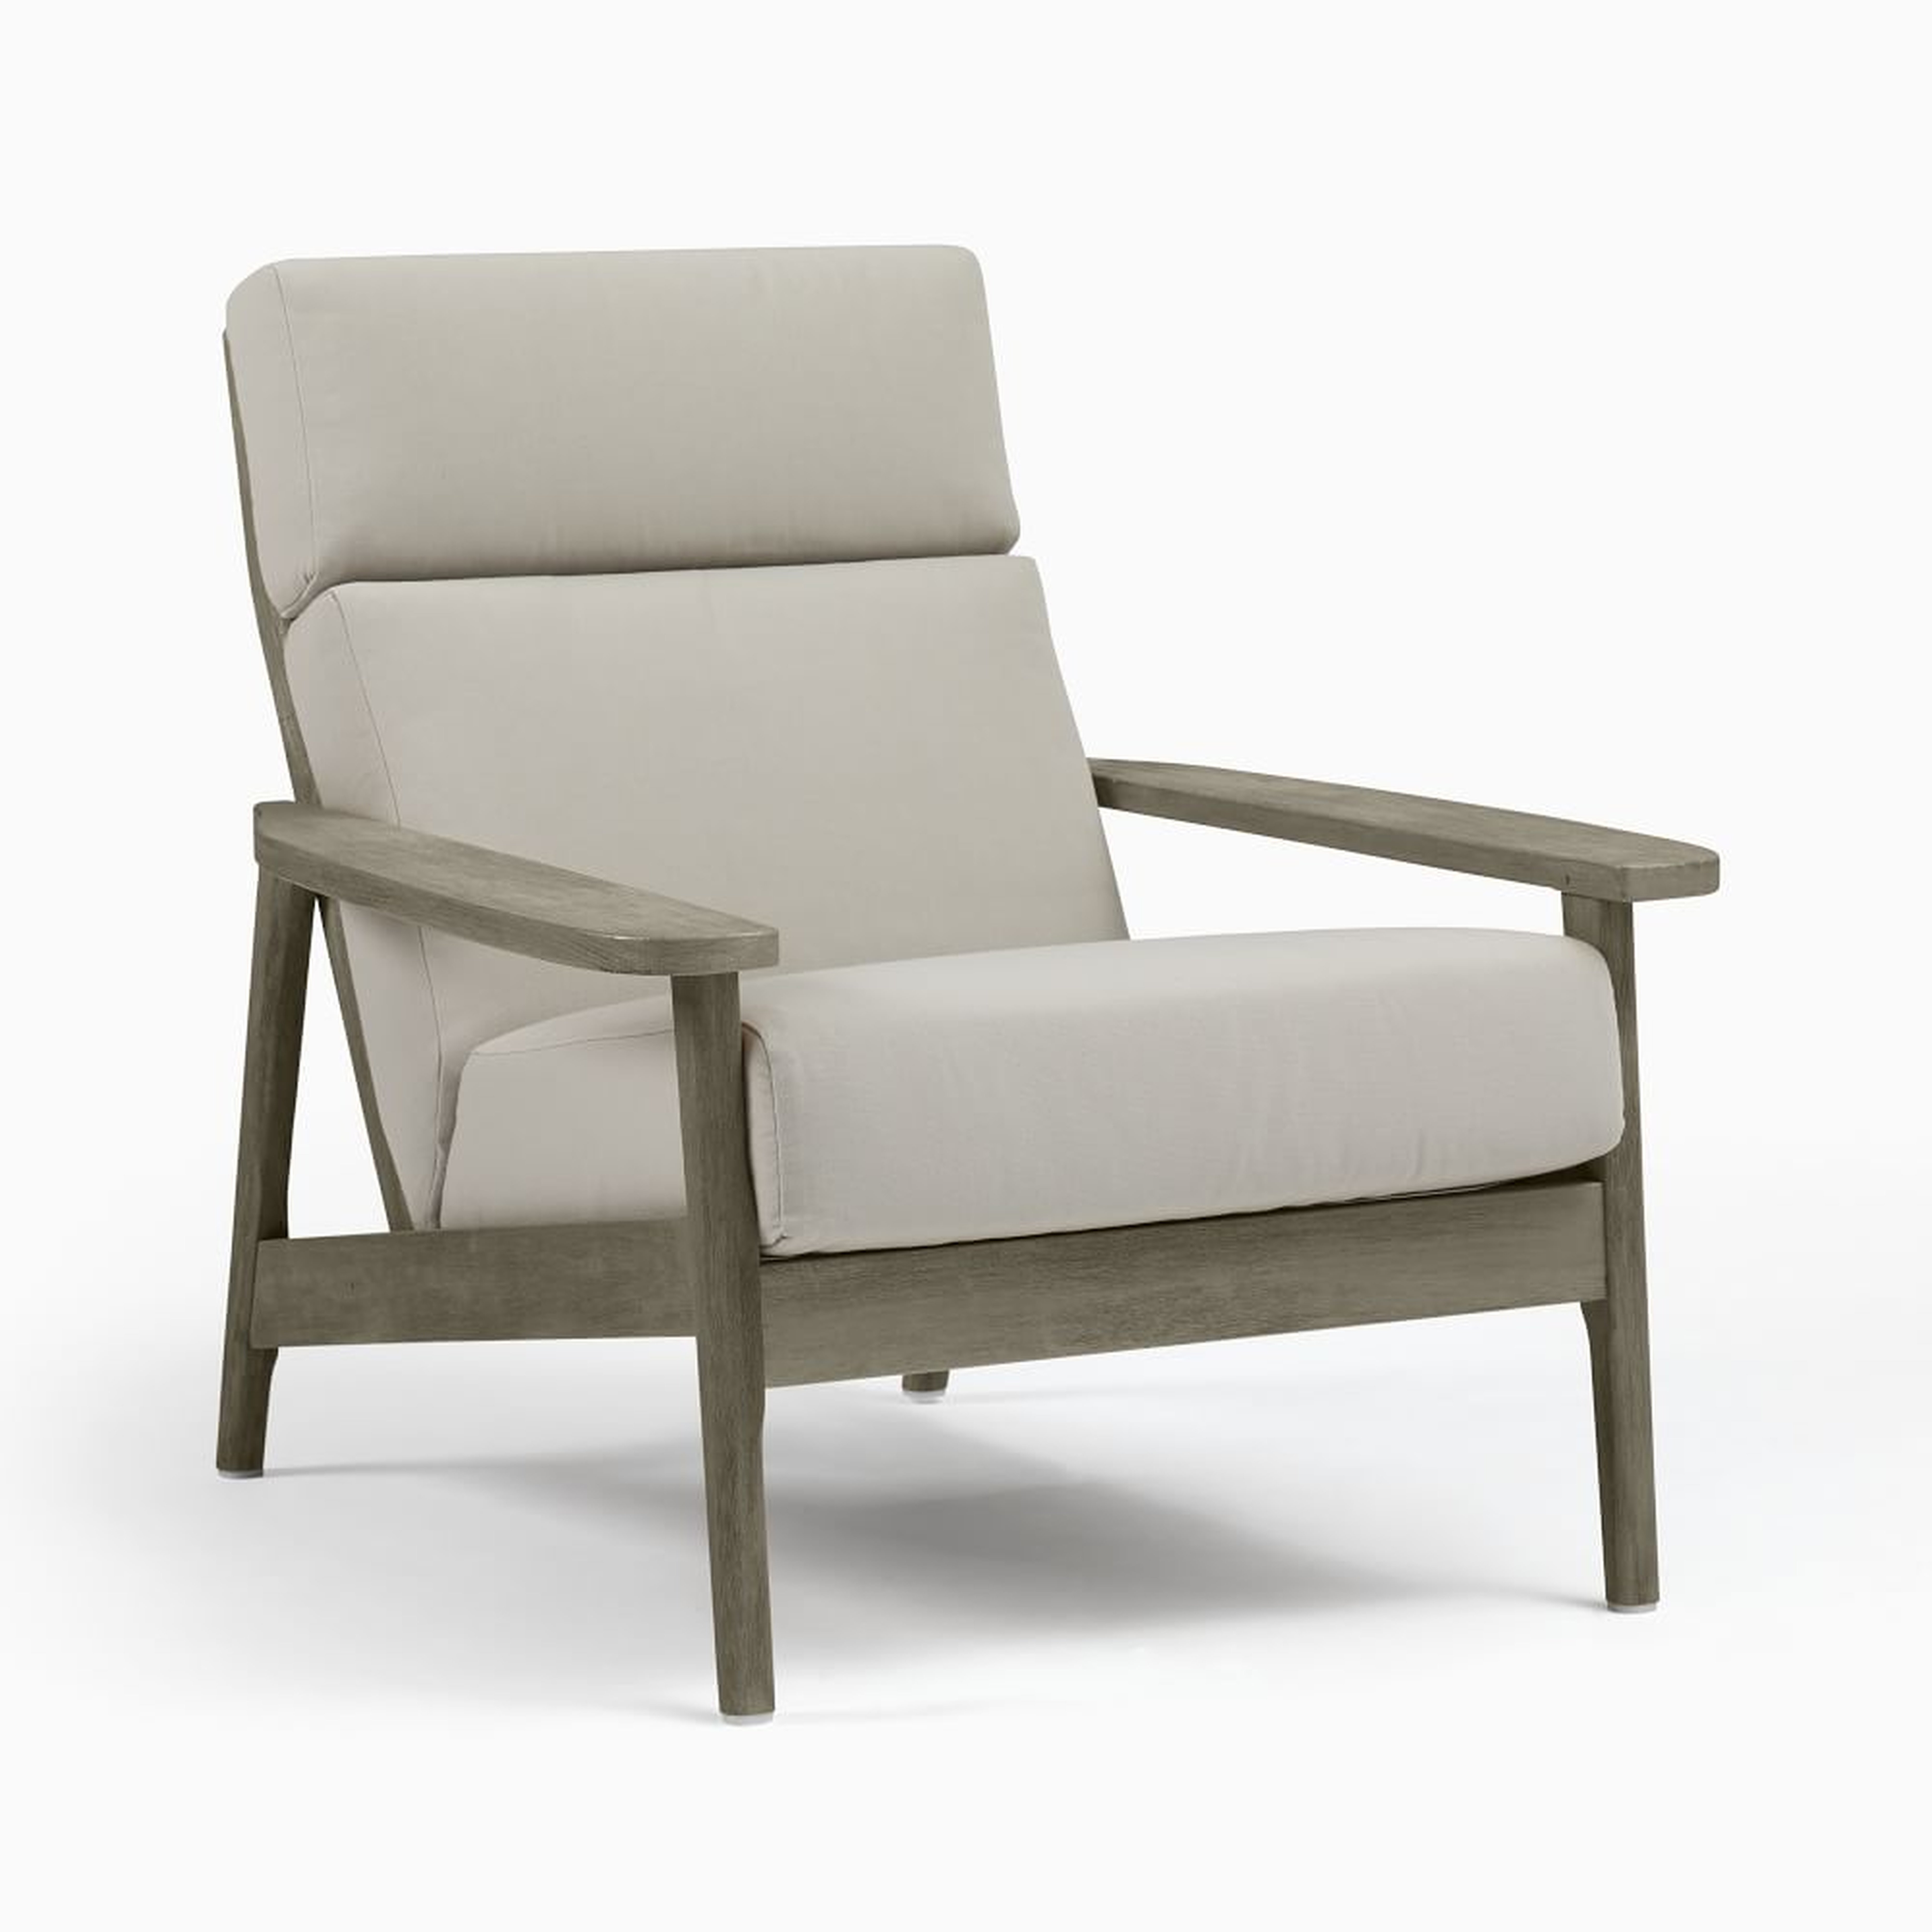 Mid-Century Outdoor Chair, High Back Lounge Chair Pack, Weathered Gray/Gray - West Elm